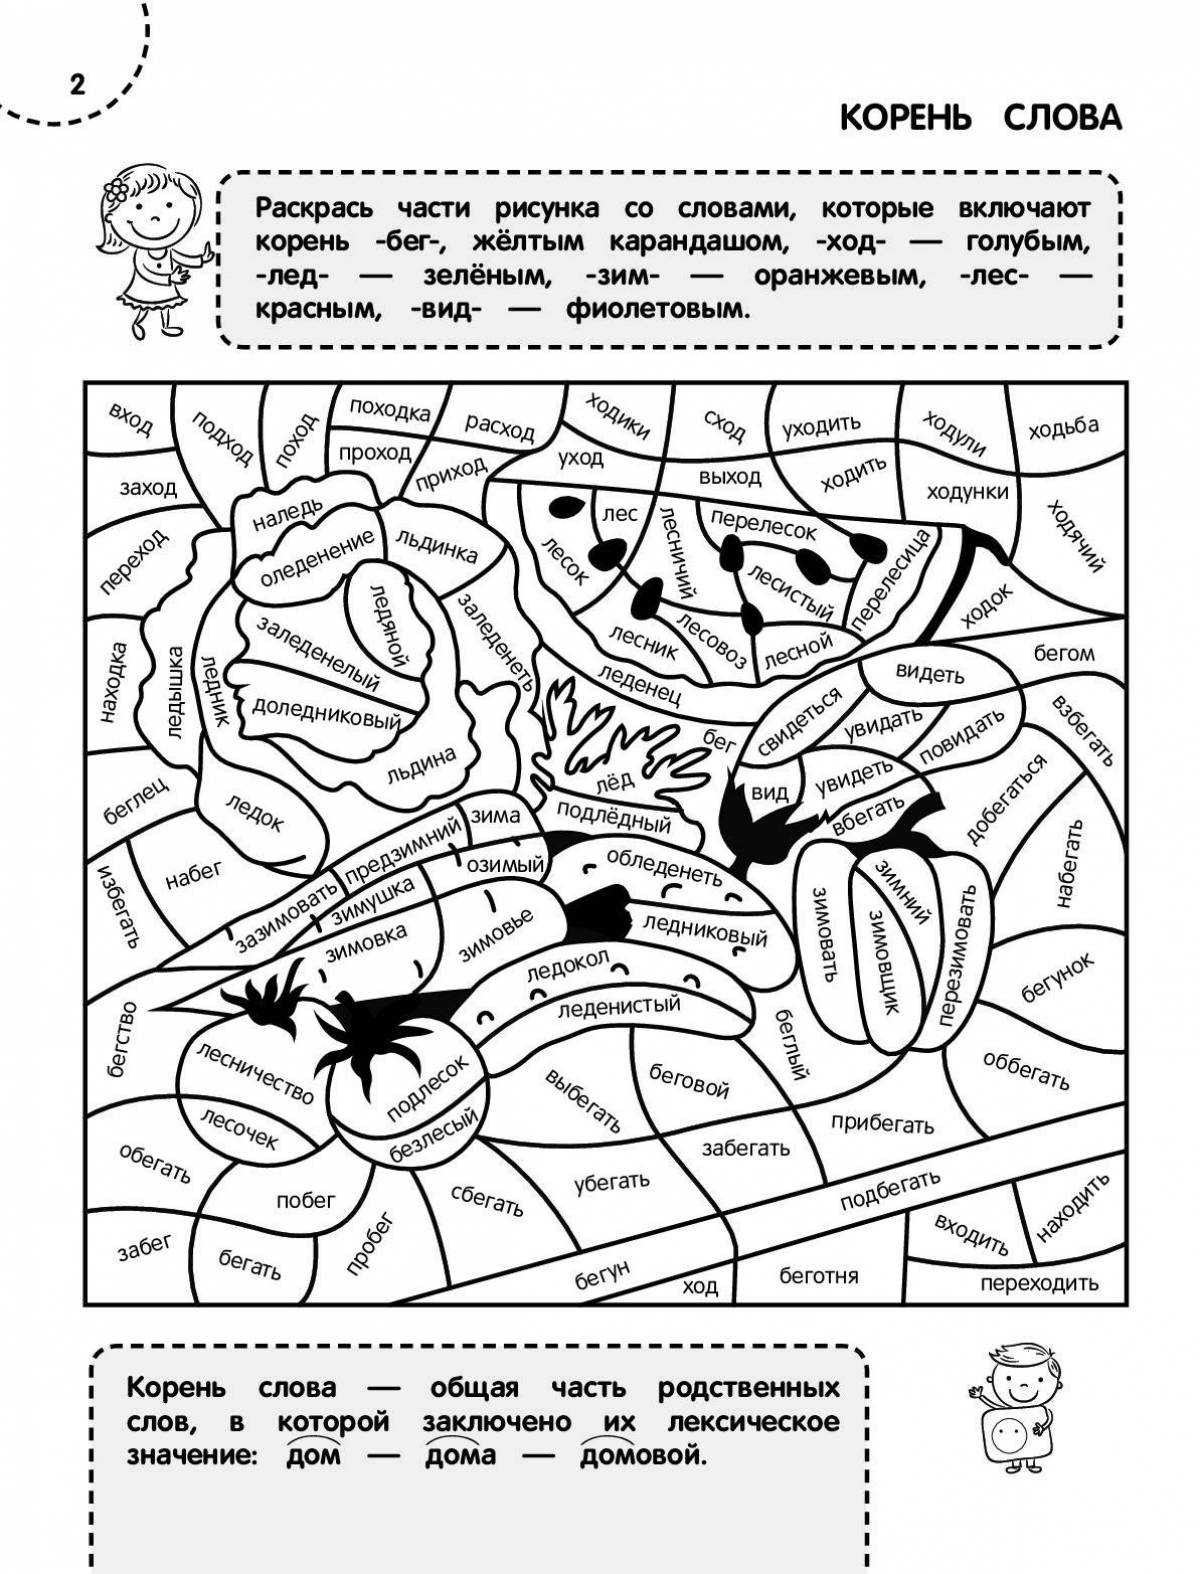 Colorful Parts of Speech Coloring Page for 2nd Grade